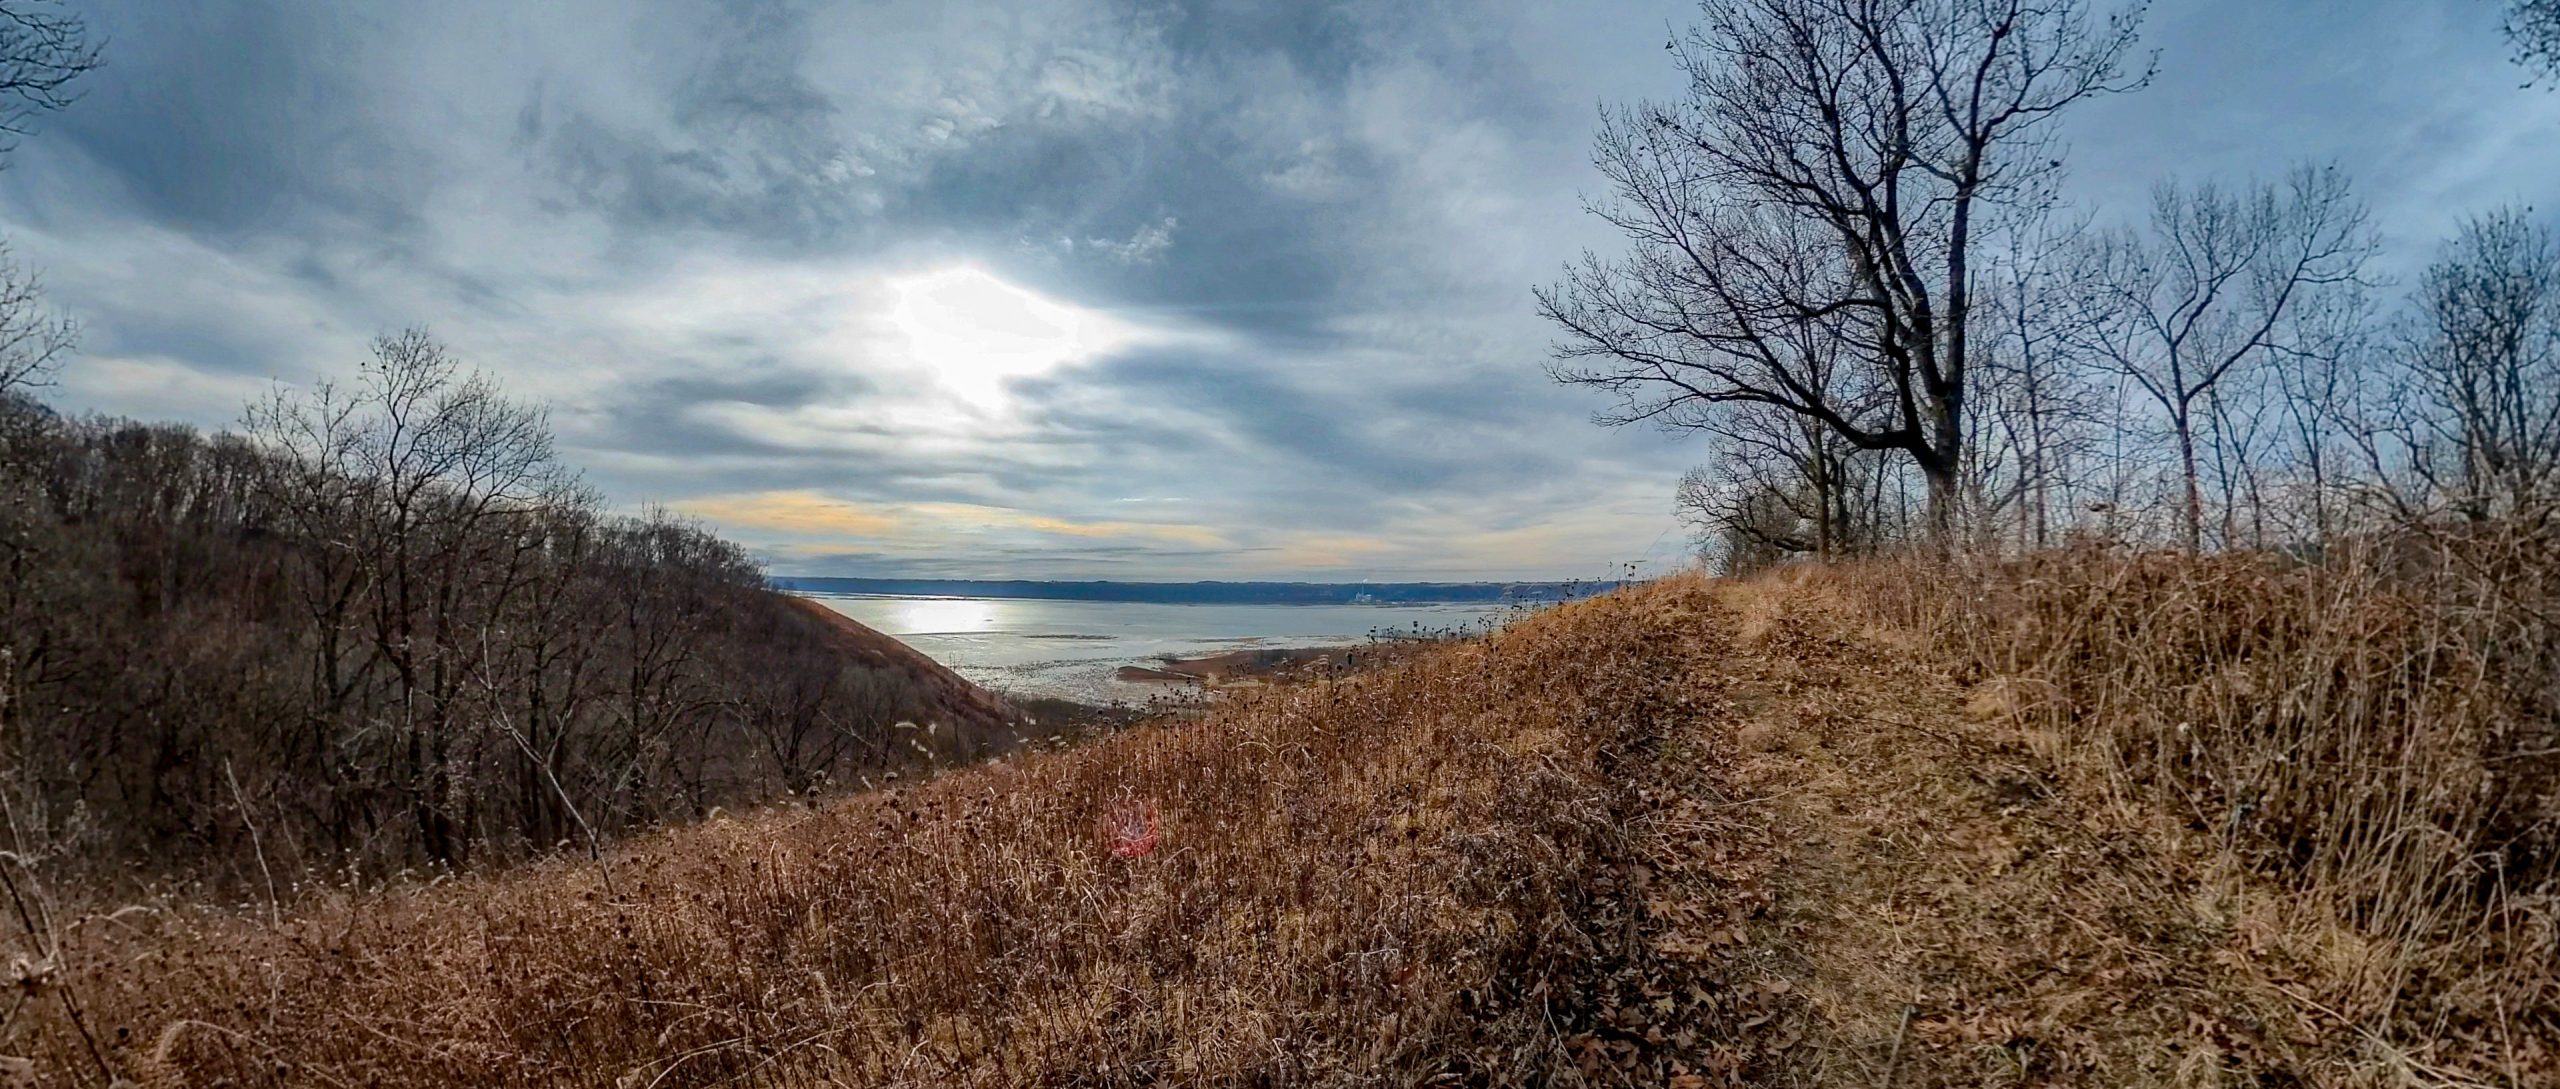 Rush Creek Bluff, Overlooking the Mississippi River